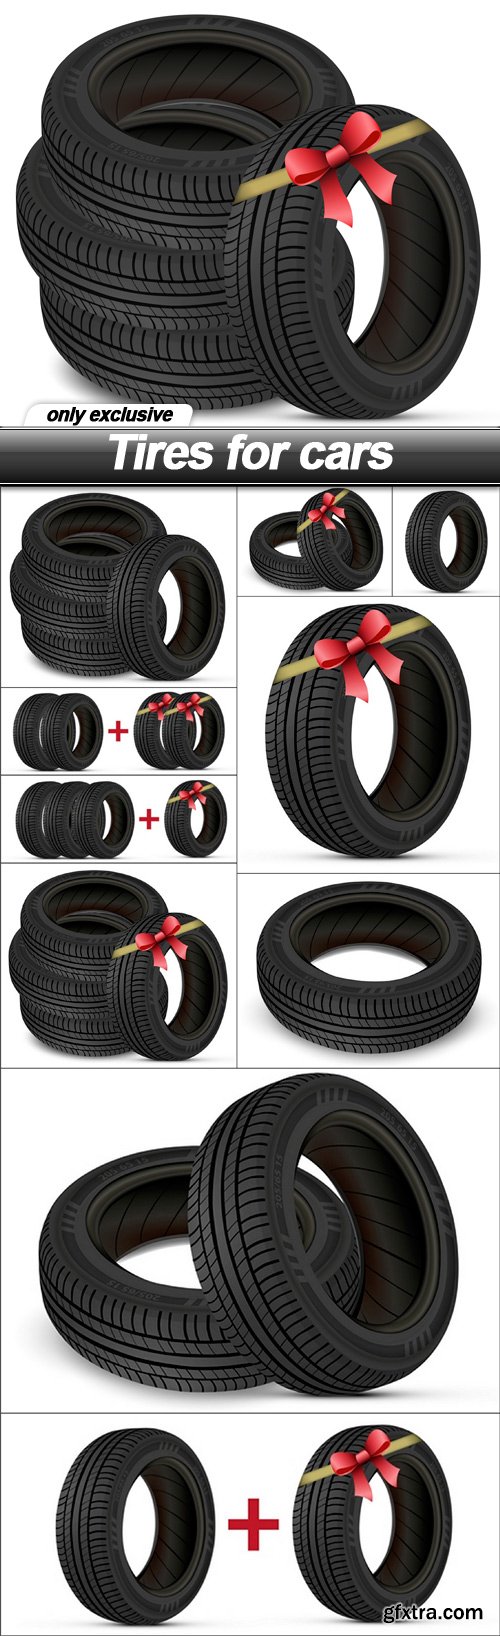 Tires for cars - 10 EPS